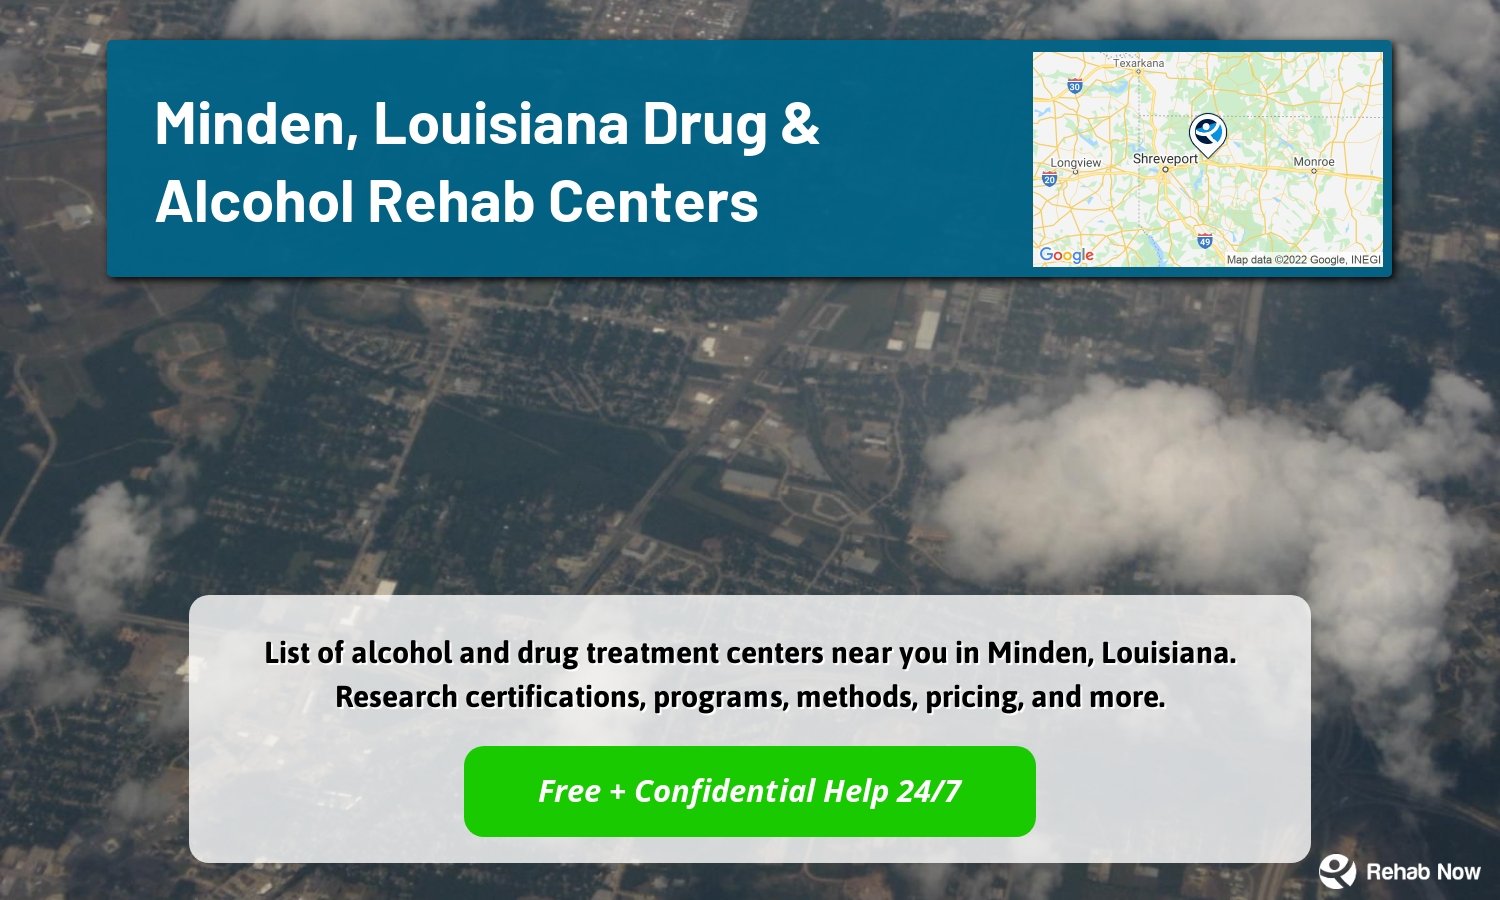 List of alcohol and drug treatment centers near you in Minden, Louisiana. Research certifications, programs, methods, pricing, and more.